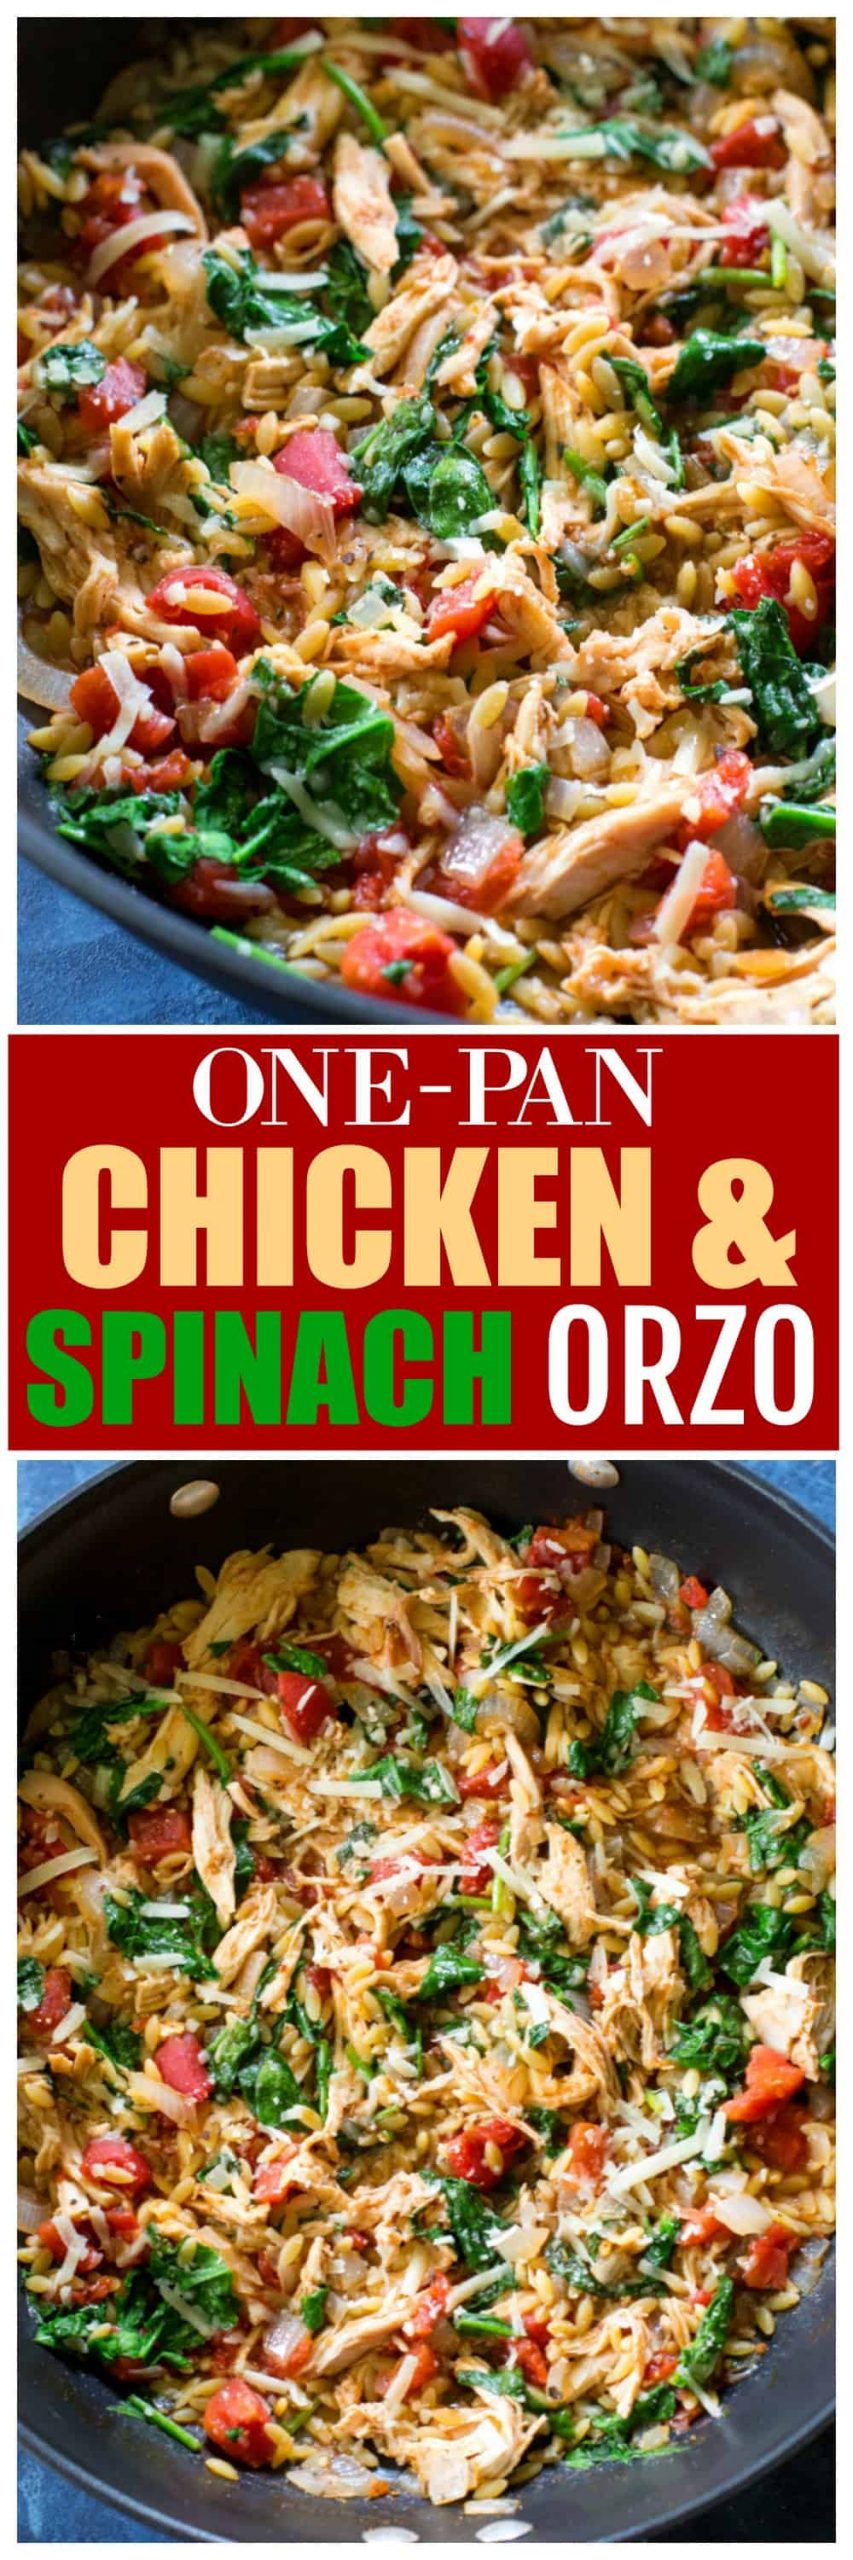 One-Pan Chicken Spinach Orzo